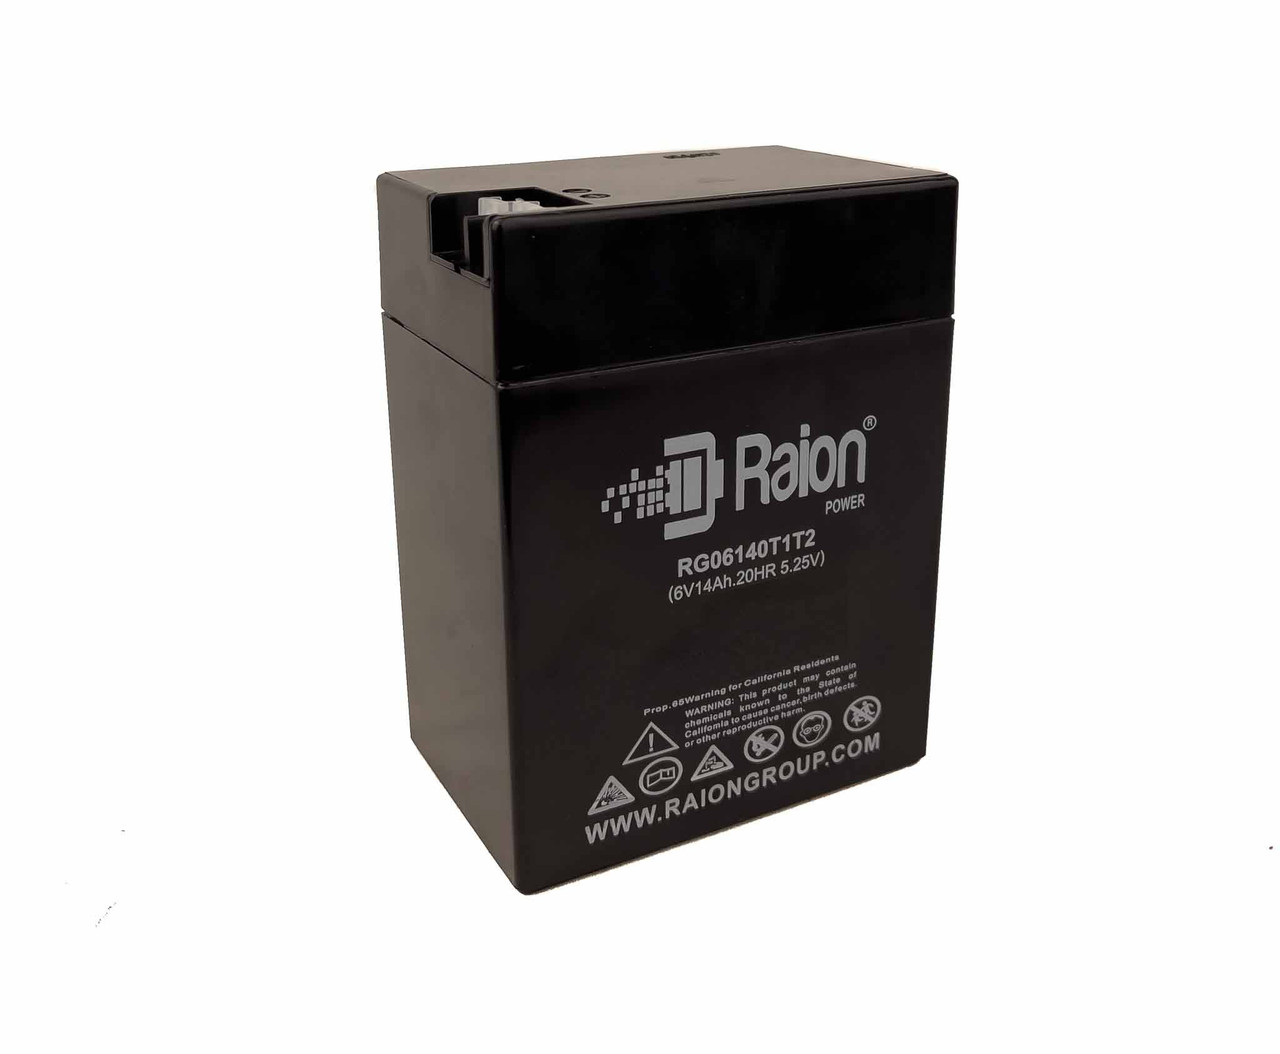 Raion Power RG06140T1T2 Non-Spillable Replacement Battery for Cycle Sound Raider 550 (Canada/Mexico) 74533-9563